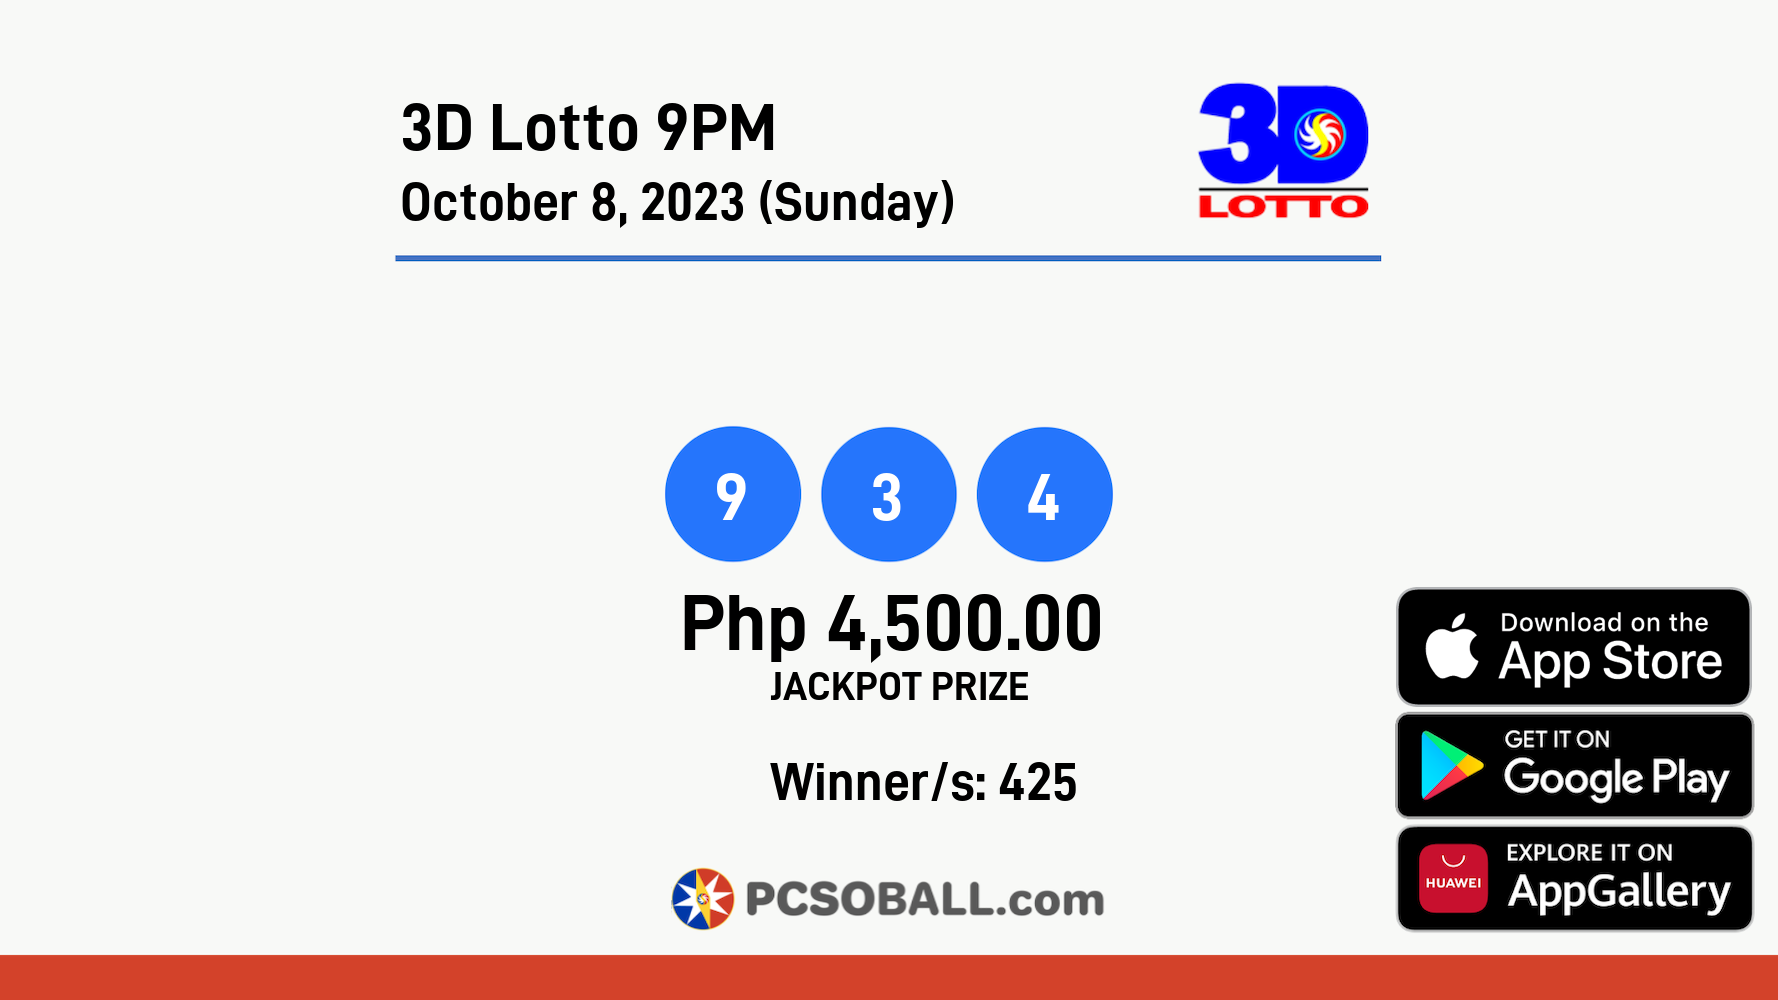 3D Lotto 9PM October 8, 2023 (Sunday) Result